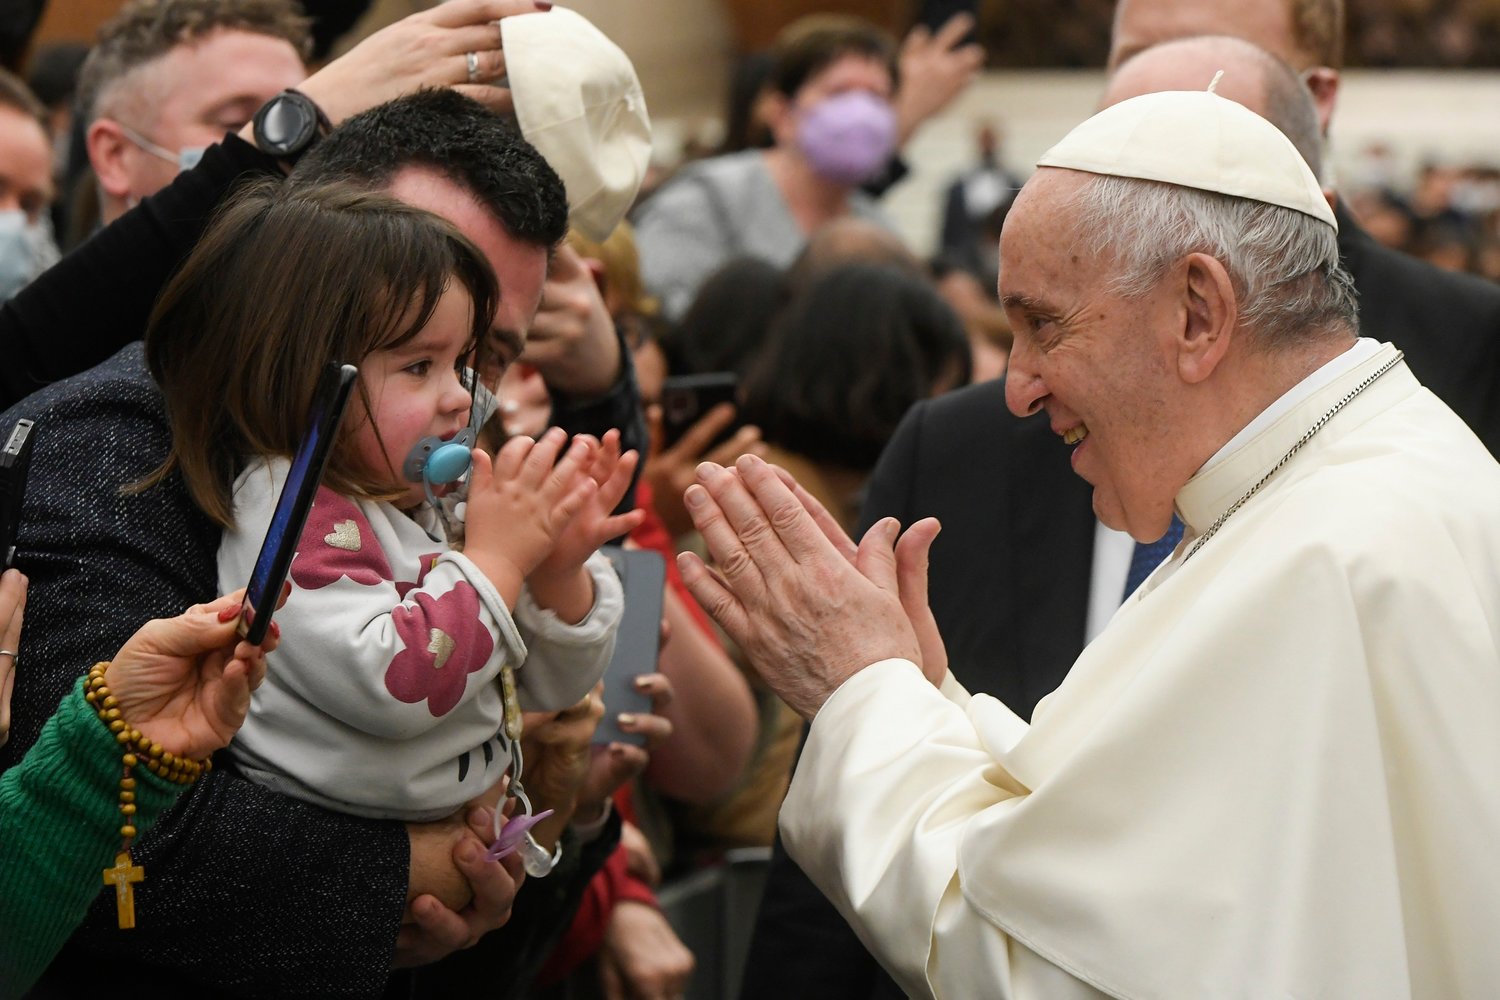 Pope Francis greets a young girl after his weekly general audience Dec. 29 in the Vatican’s Paul VI hall.